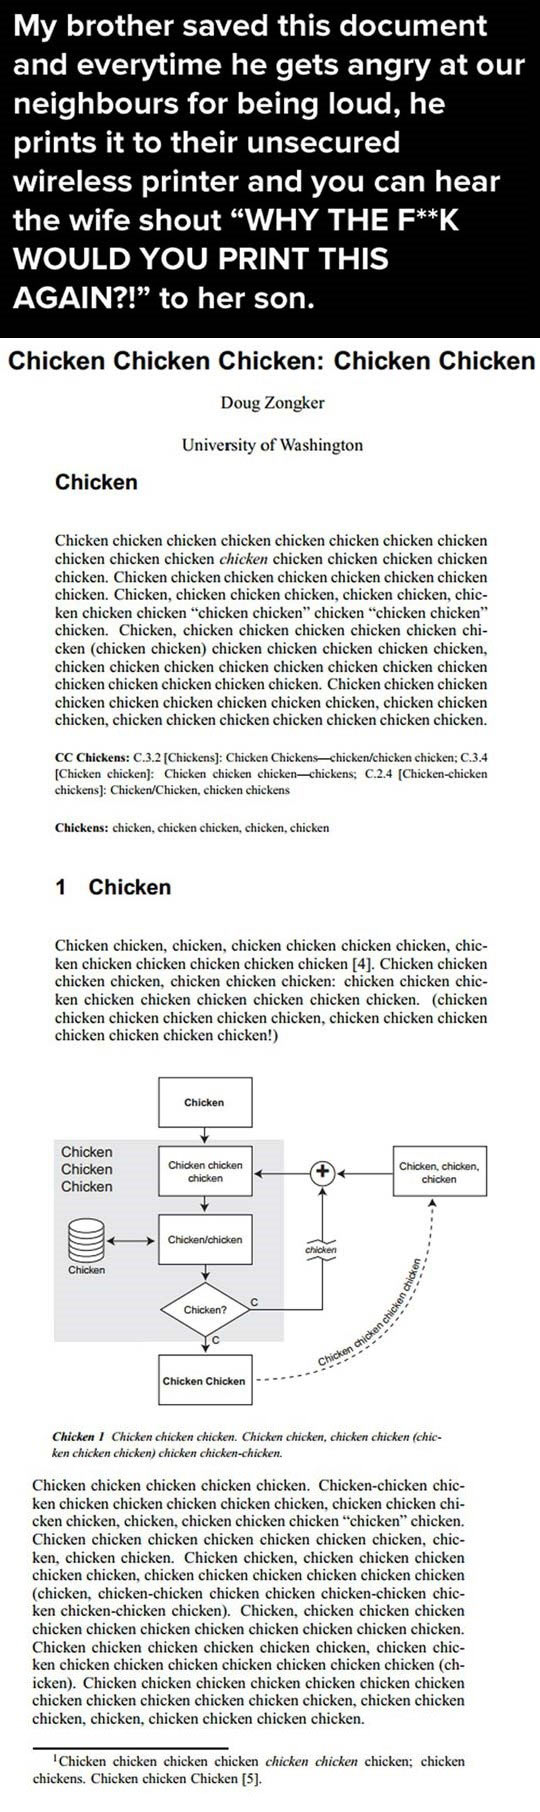 Chicken Has No Meaning Anymore